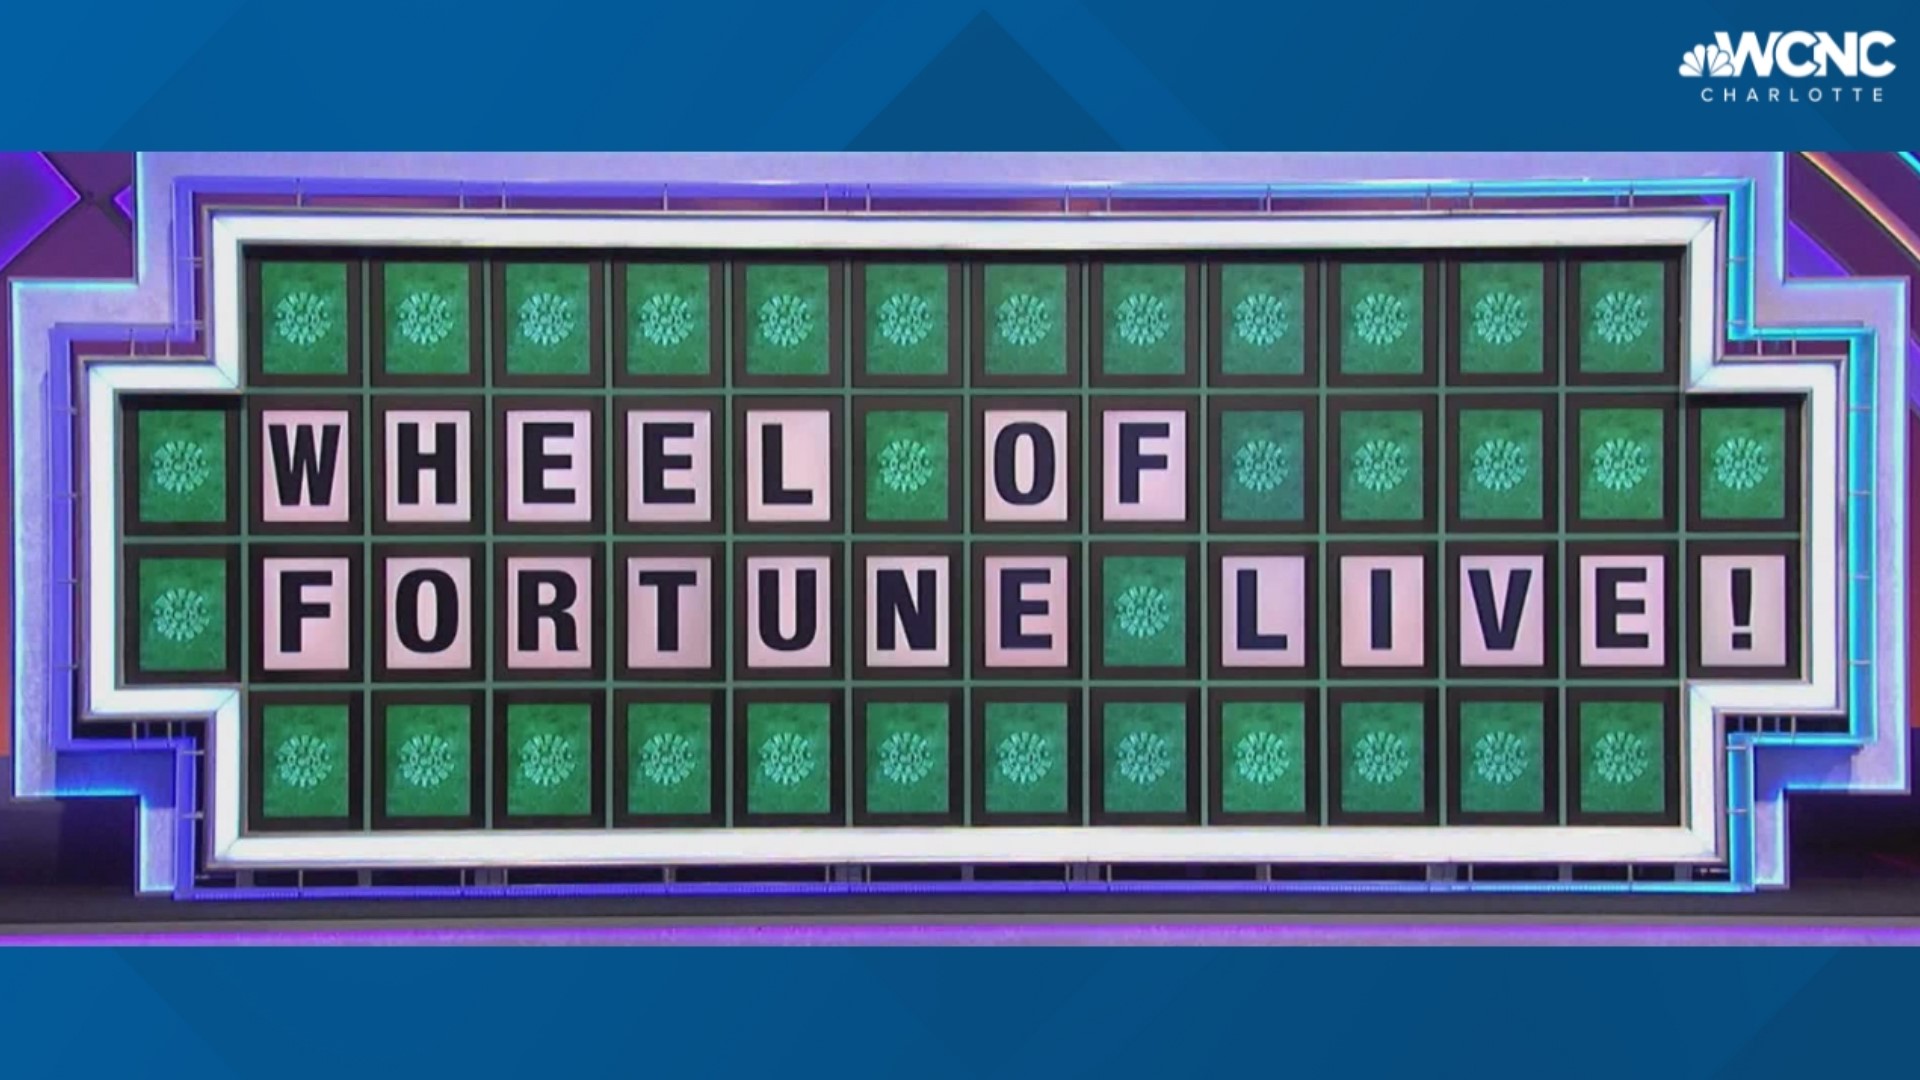 Ovens Auditorium is hosting the traveling Wheel of Fortune LIVE! show on Monday.